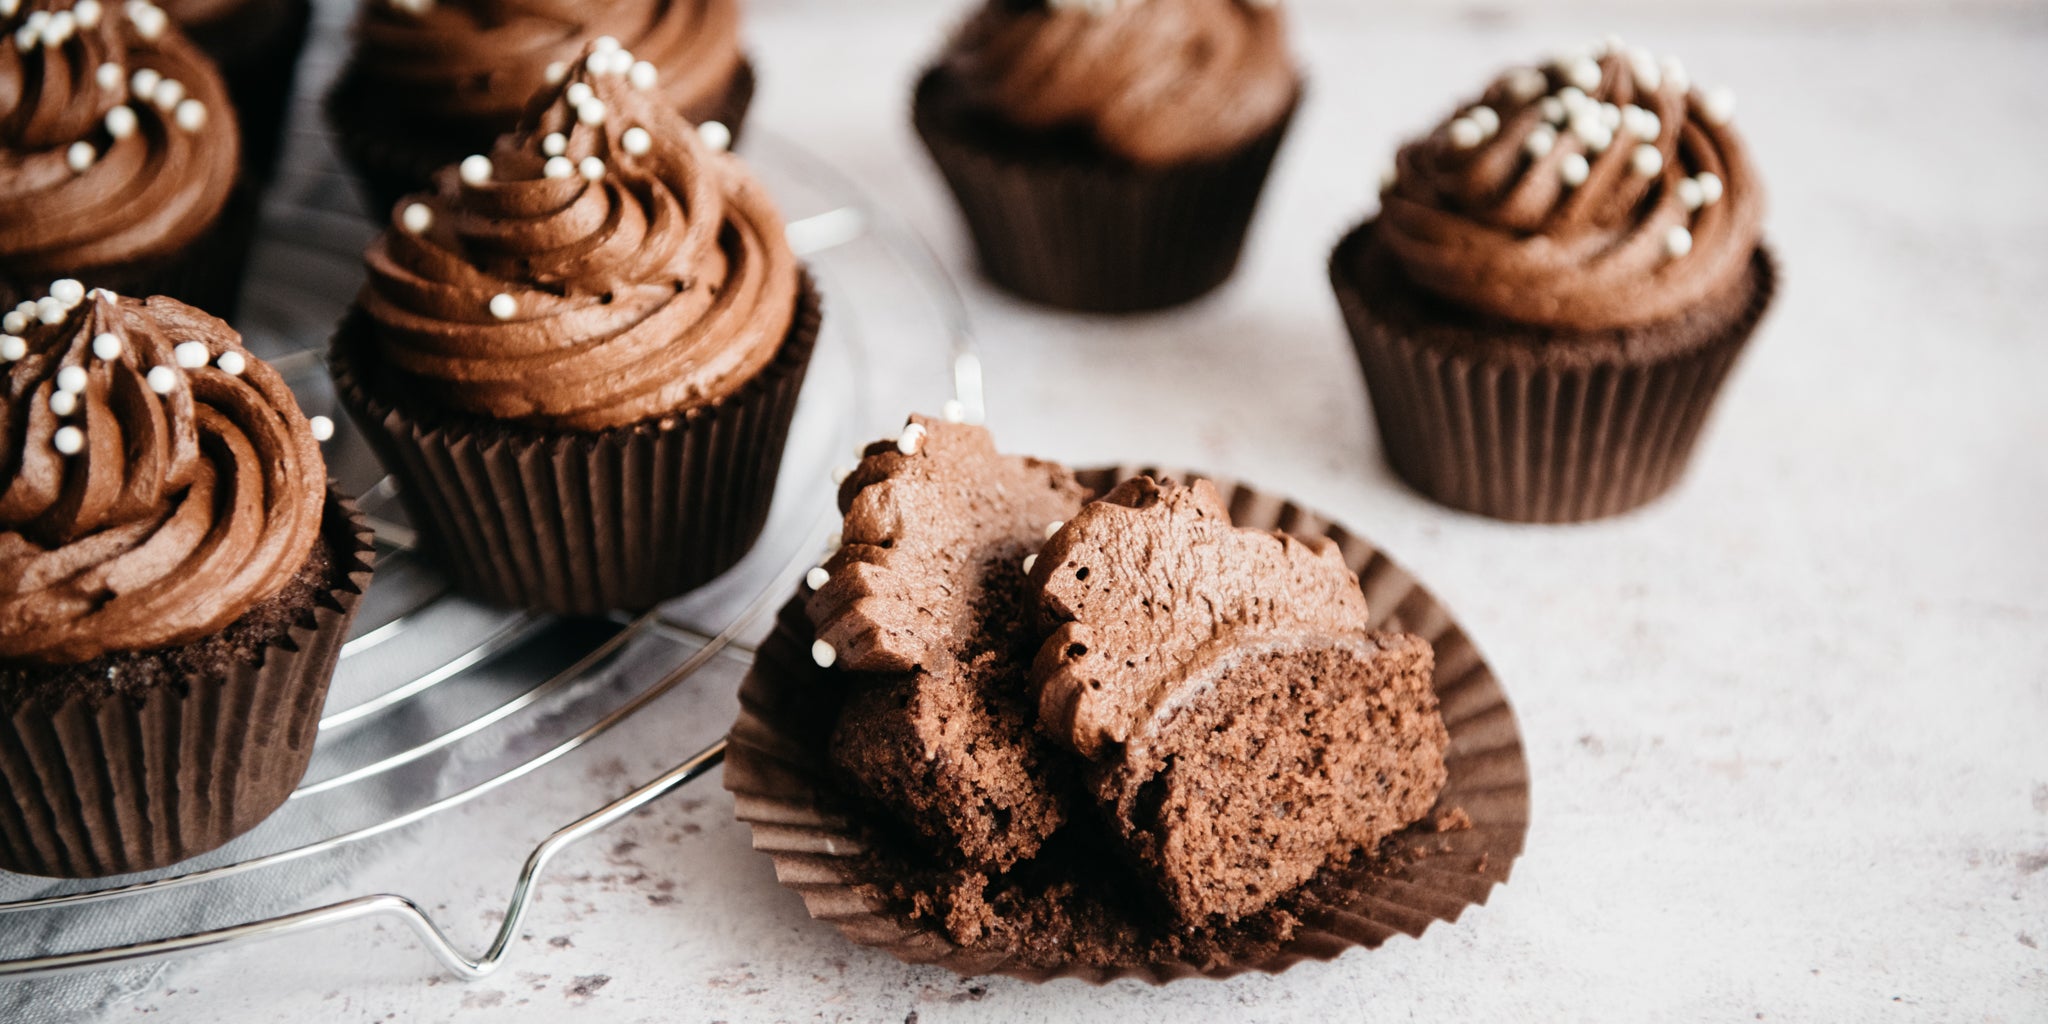 Close up of Wholemeal Chocolate Cupcakes cut in half, showing the moist rich inside. 